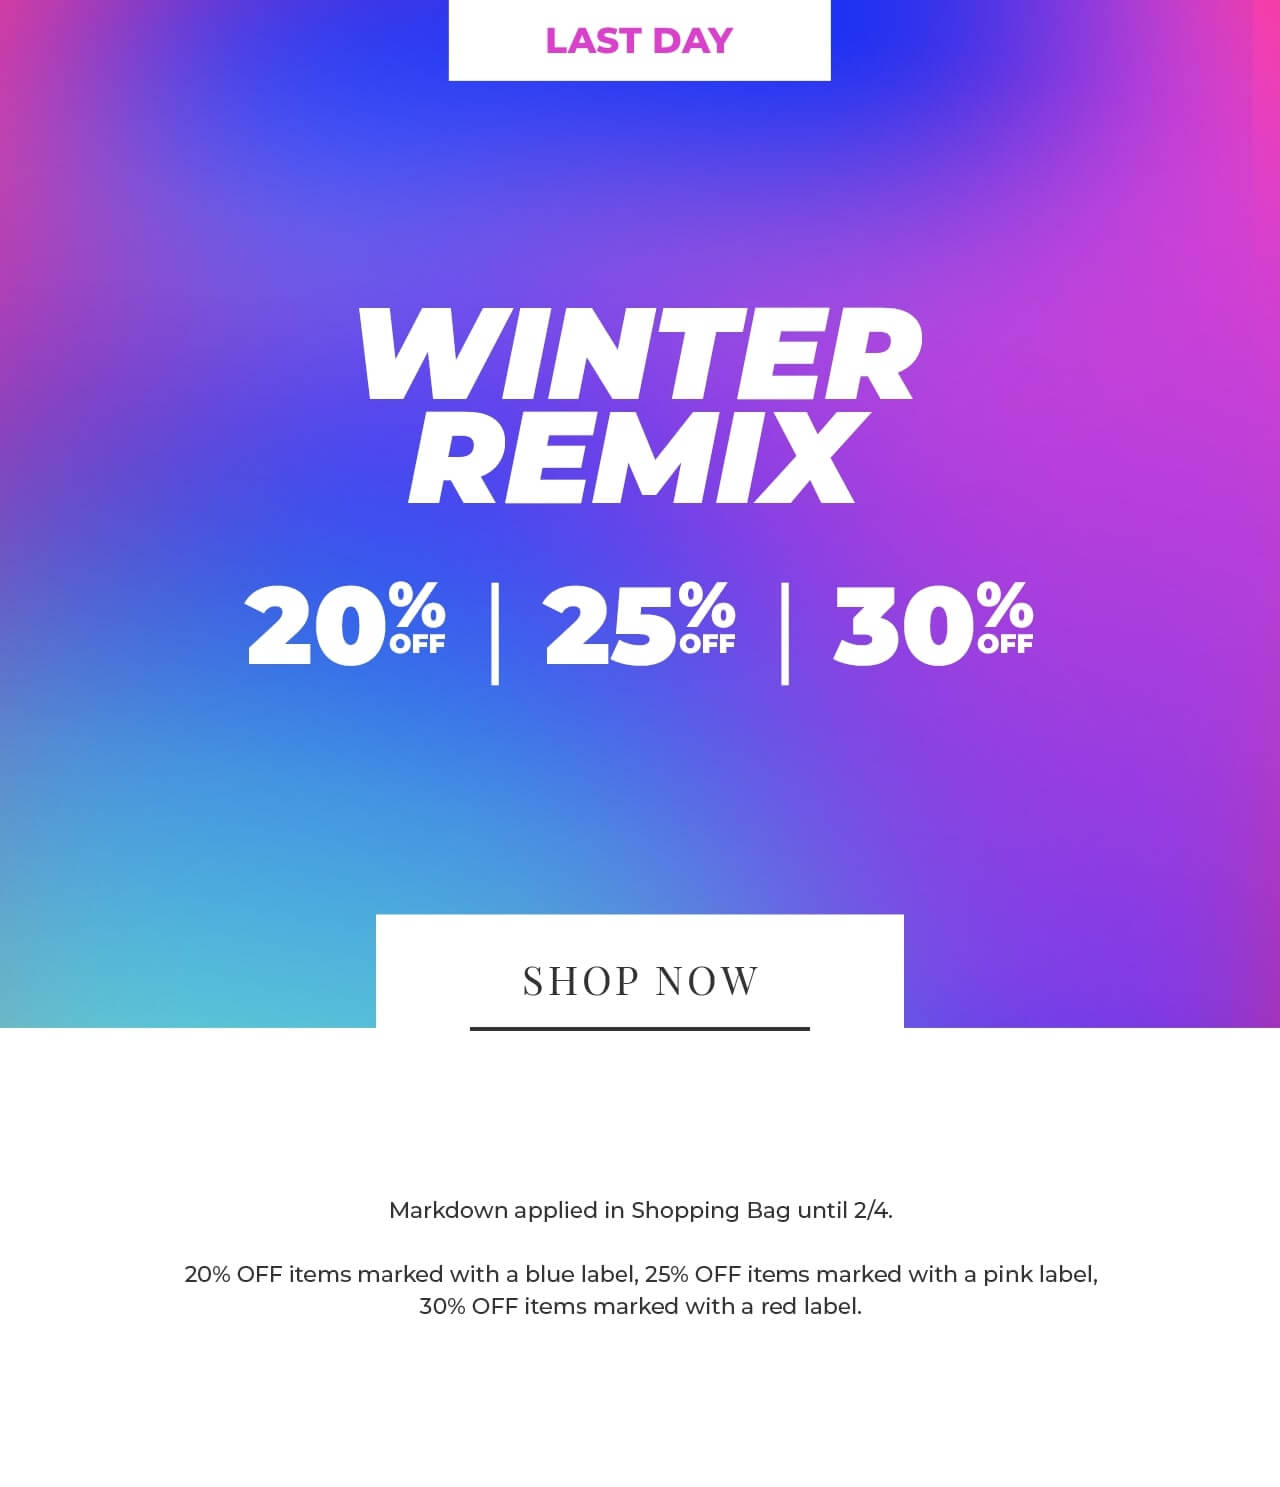 LAST DAY U3 REMIX y 1 AR T VAR T X Markdown applied in Shopping Bag until 24. 20% OFF items marked with a blue label, 25% OFF items marked with a pink label, 30% OFF items marked with a red label. 